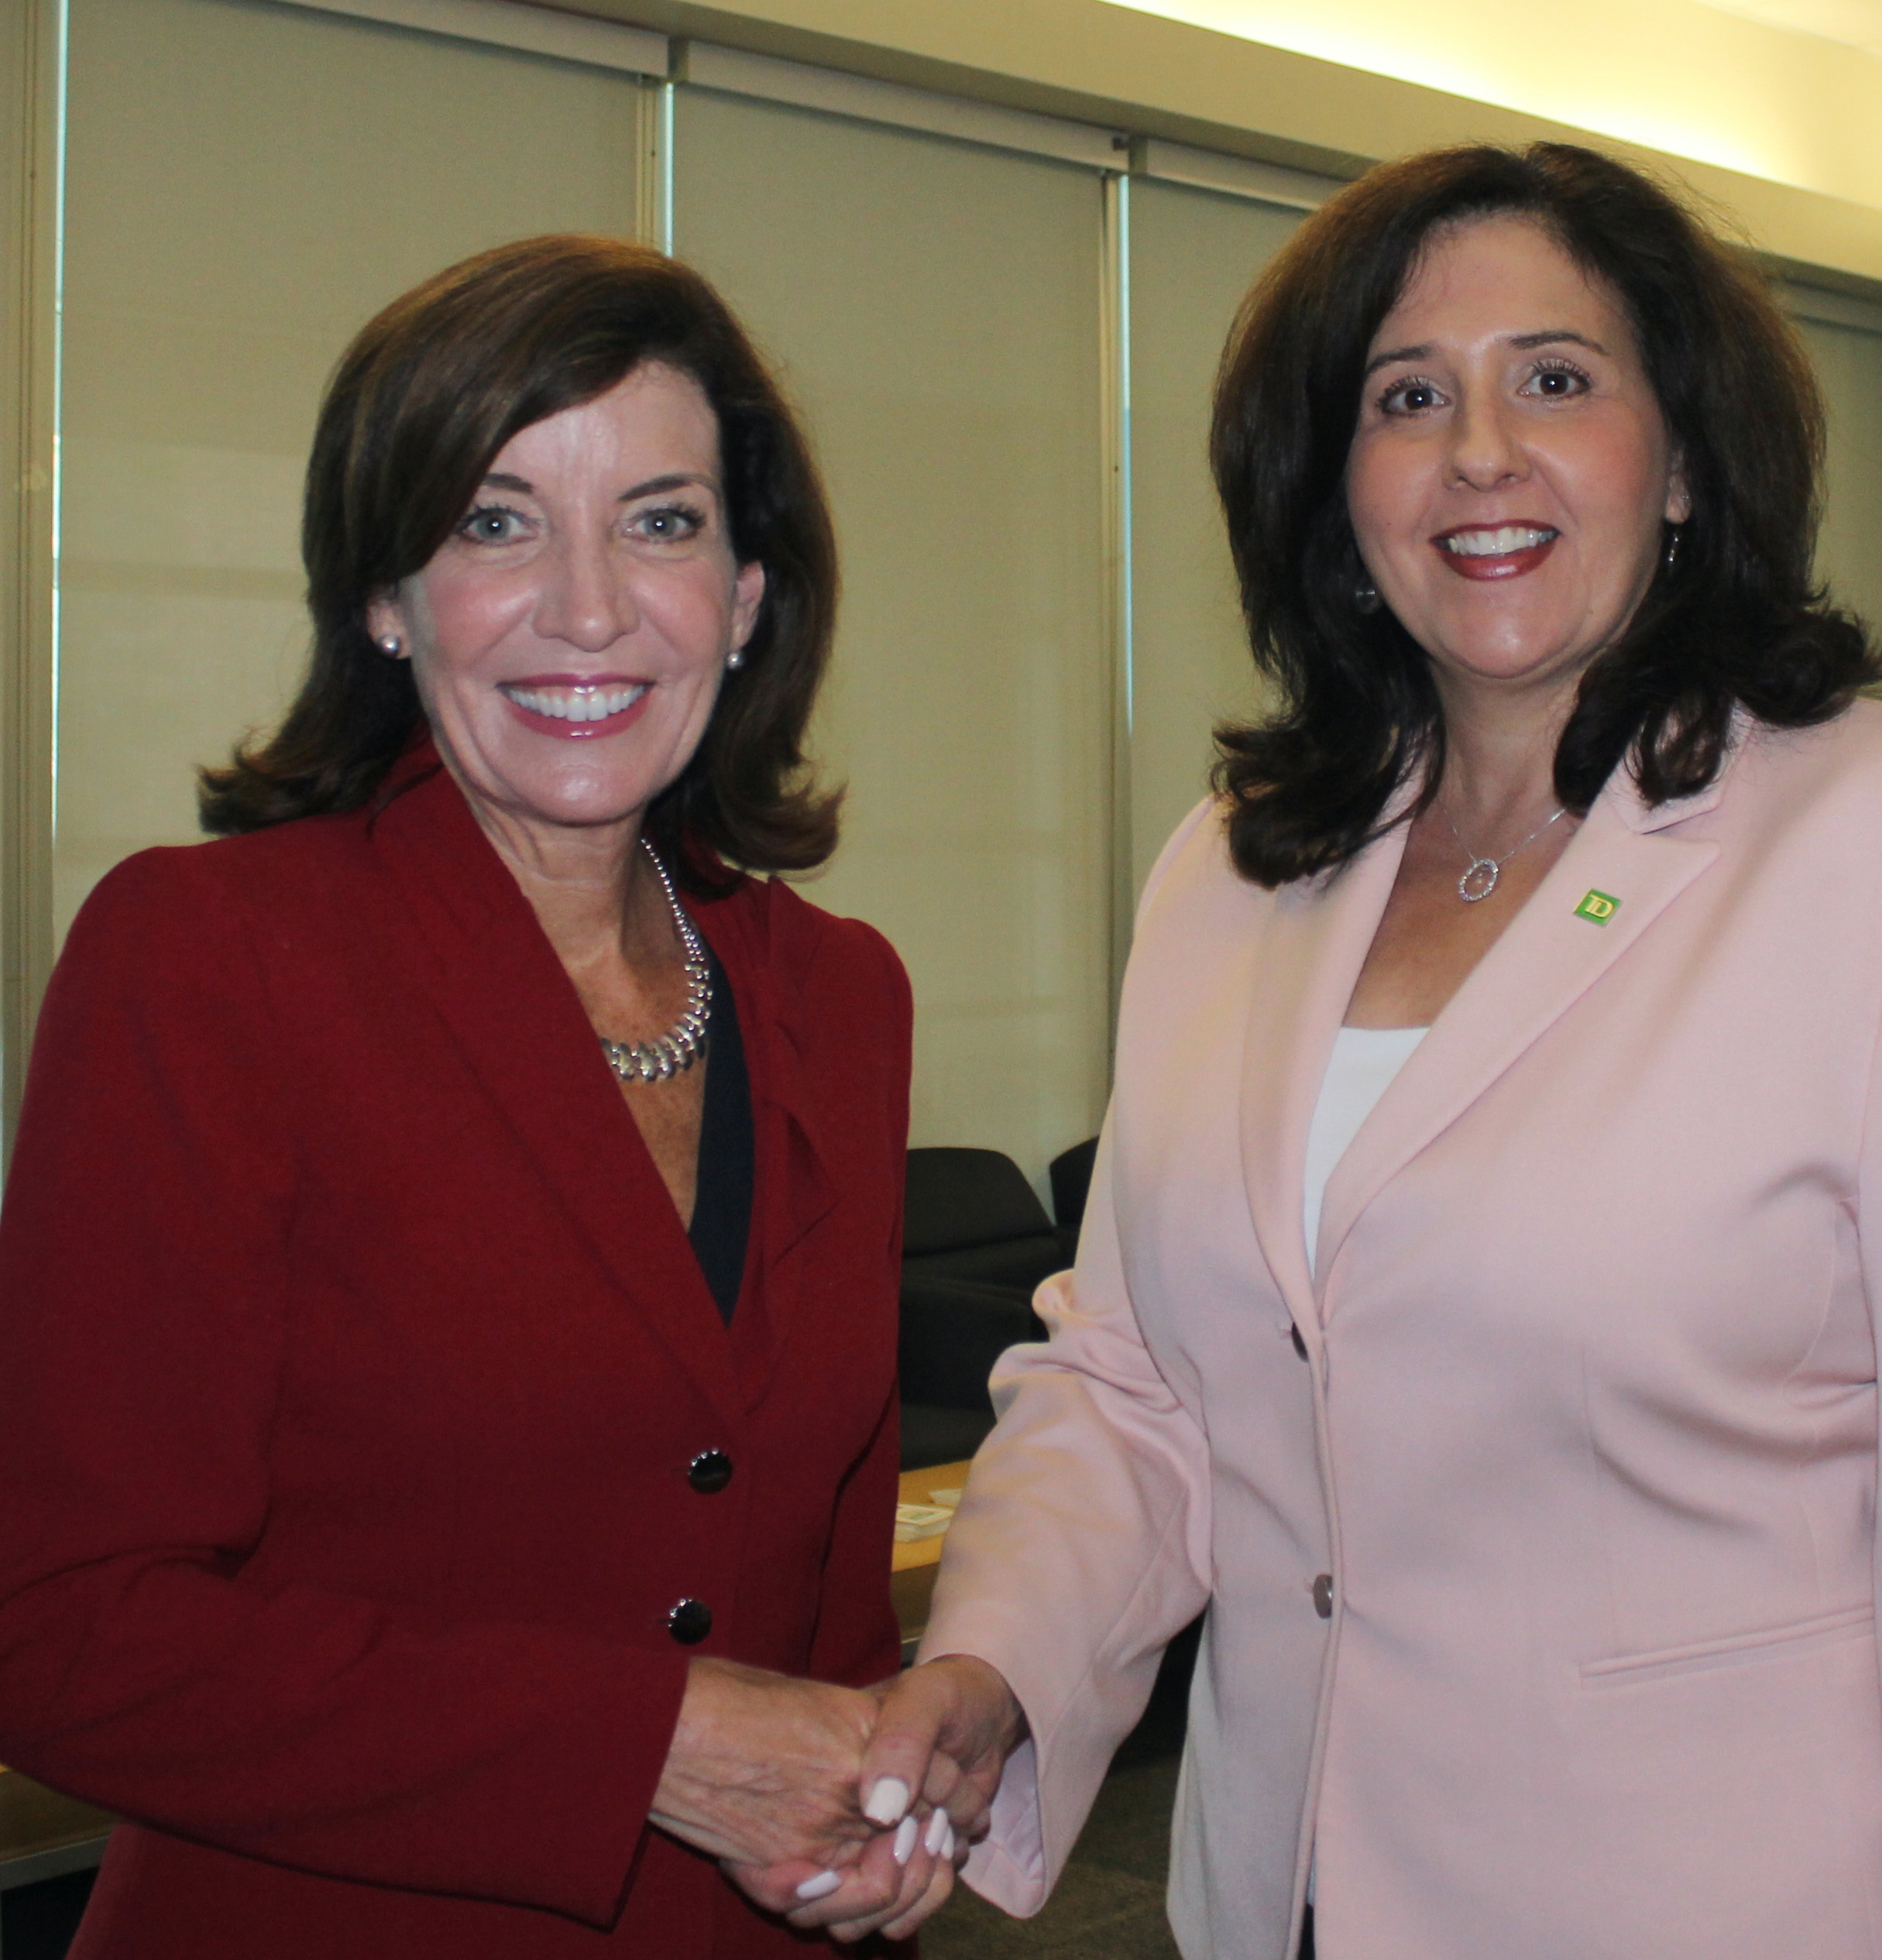 Hochul to lead New York